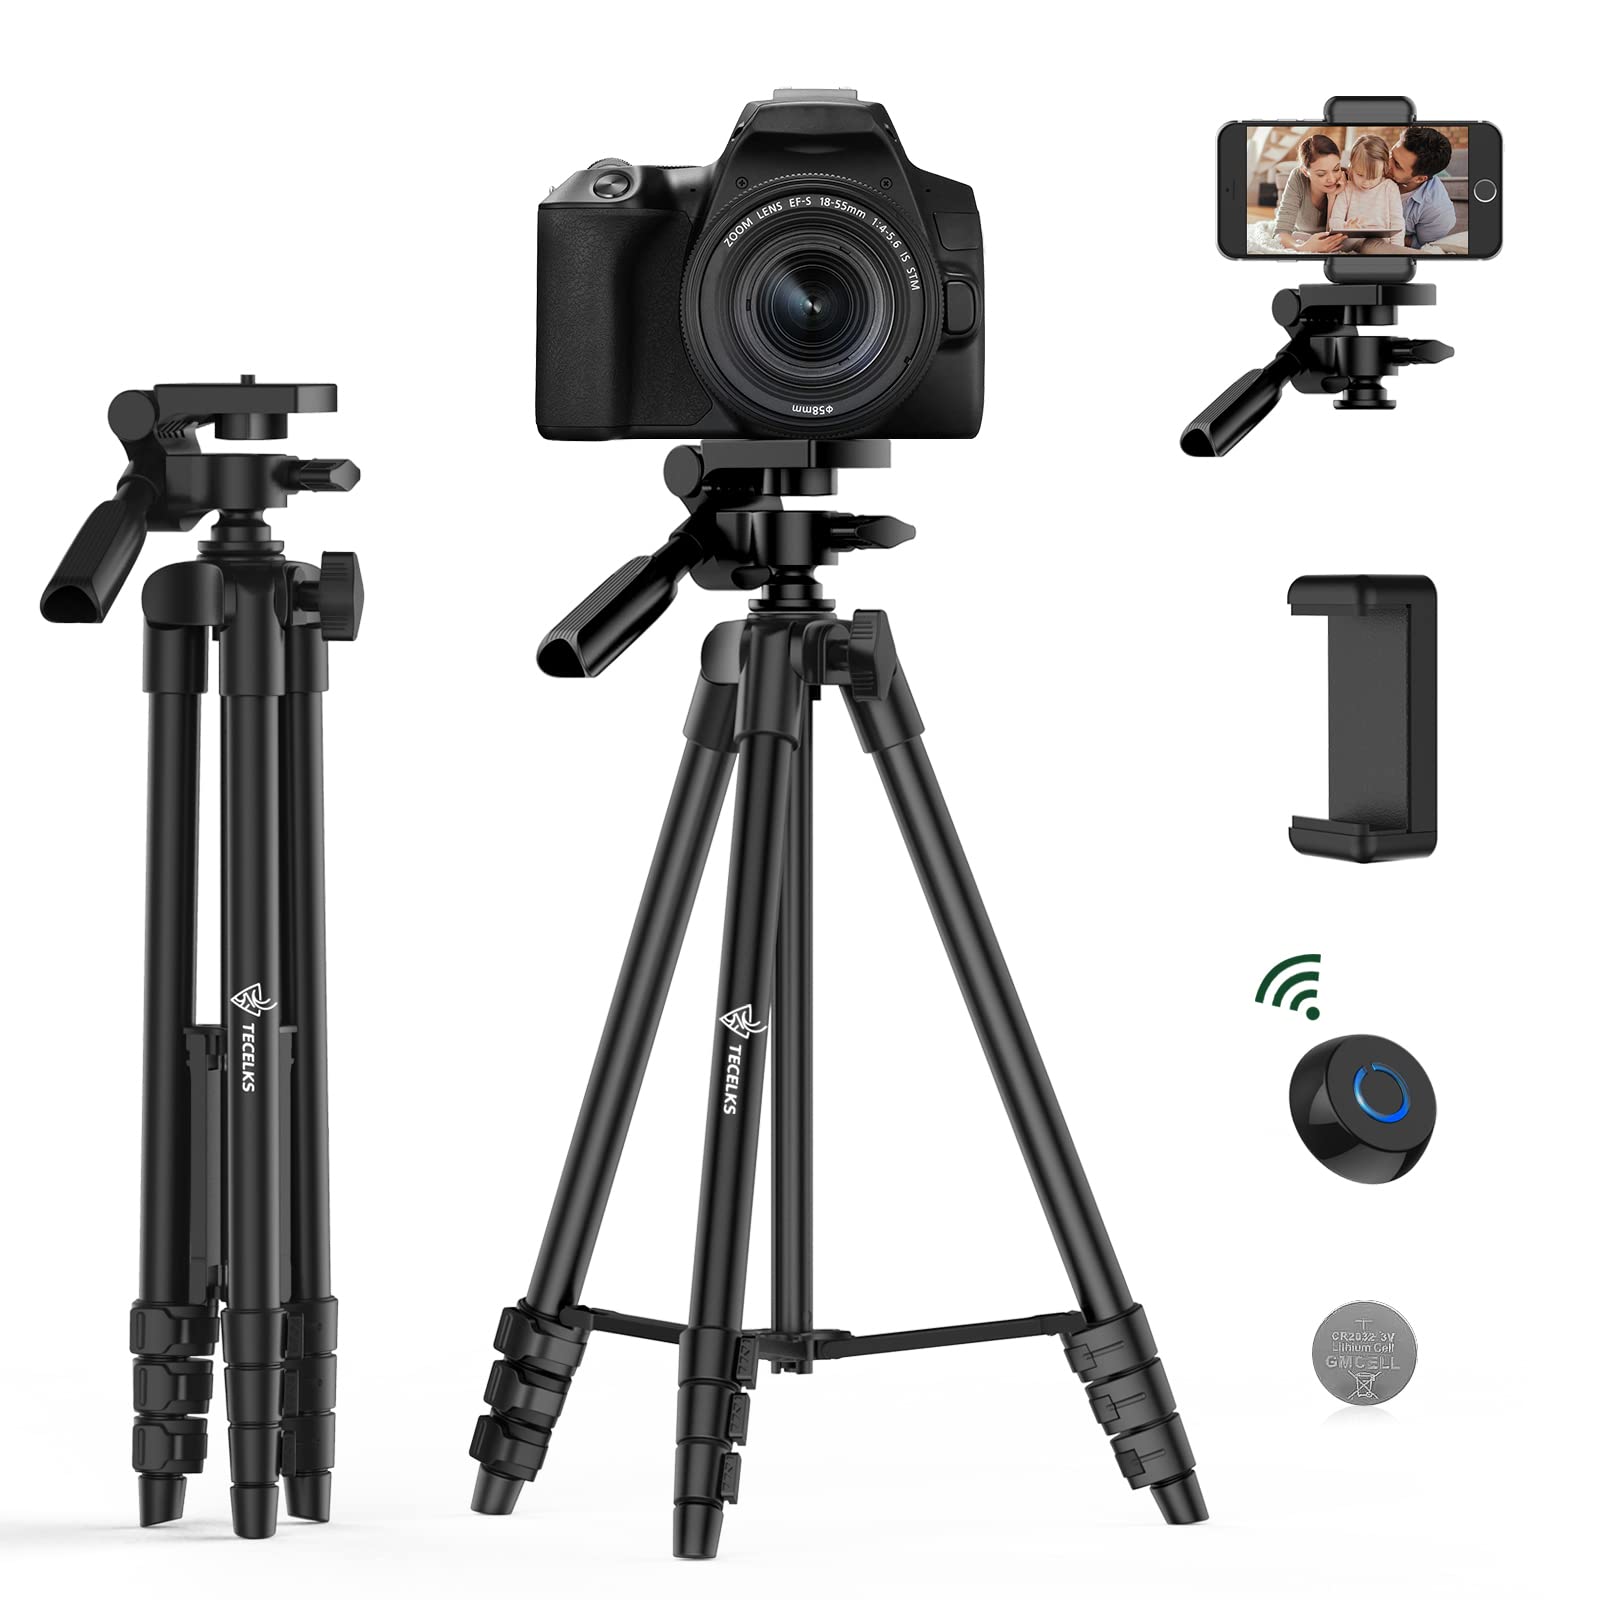 Lightweight Tripod 55-Inch/135cm, Travel/Video/Phone/Camera Tripod Stand with Wireless Remote Shutter, Phone Clip, Carry Bag for Travel/YouTube Video/Photography/Vlog, Compatible with iOS & Android